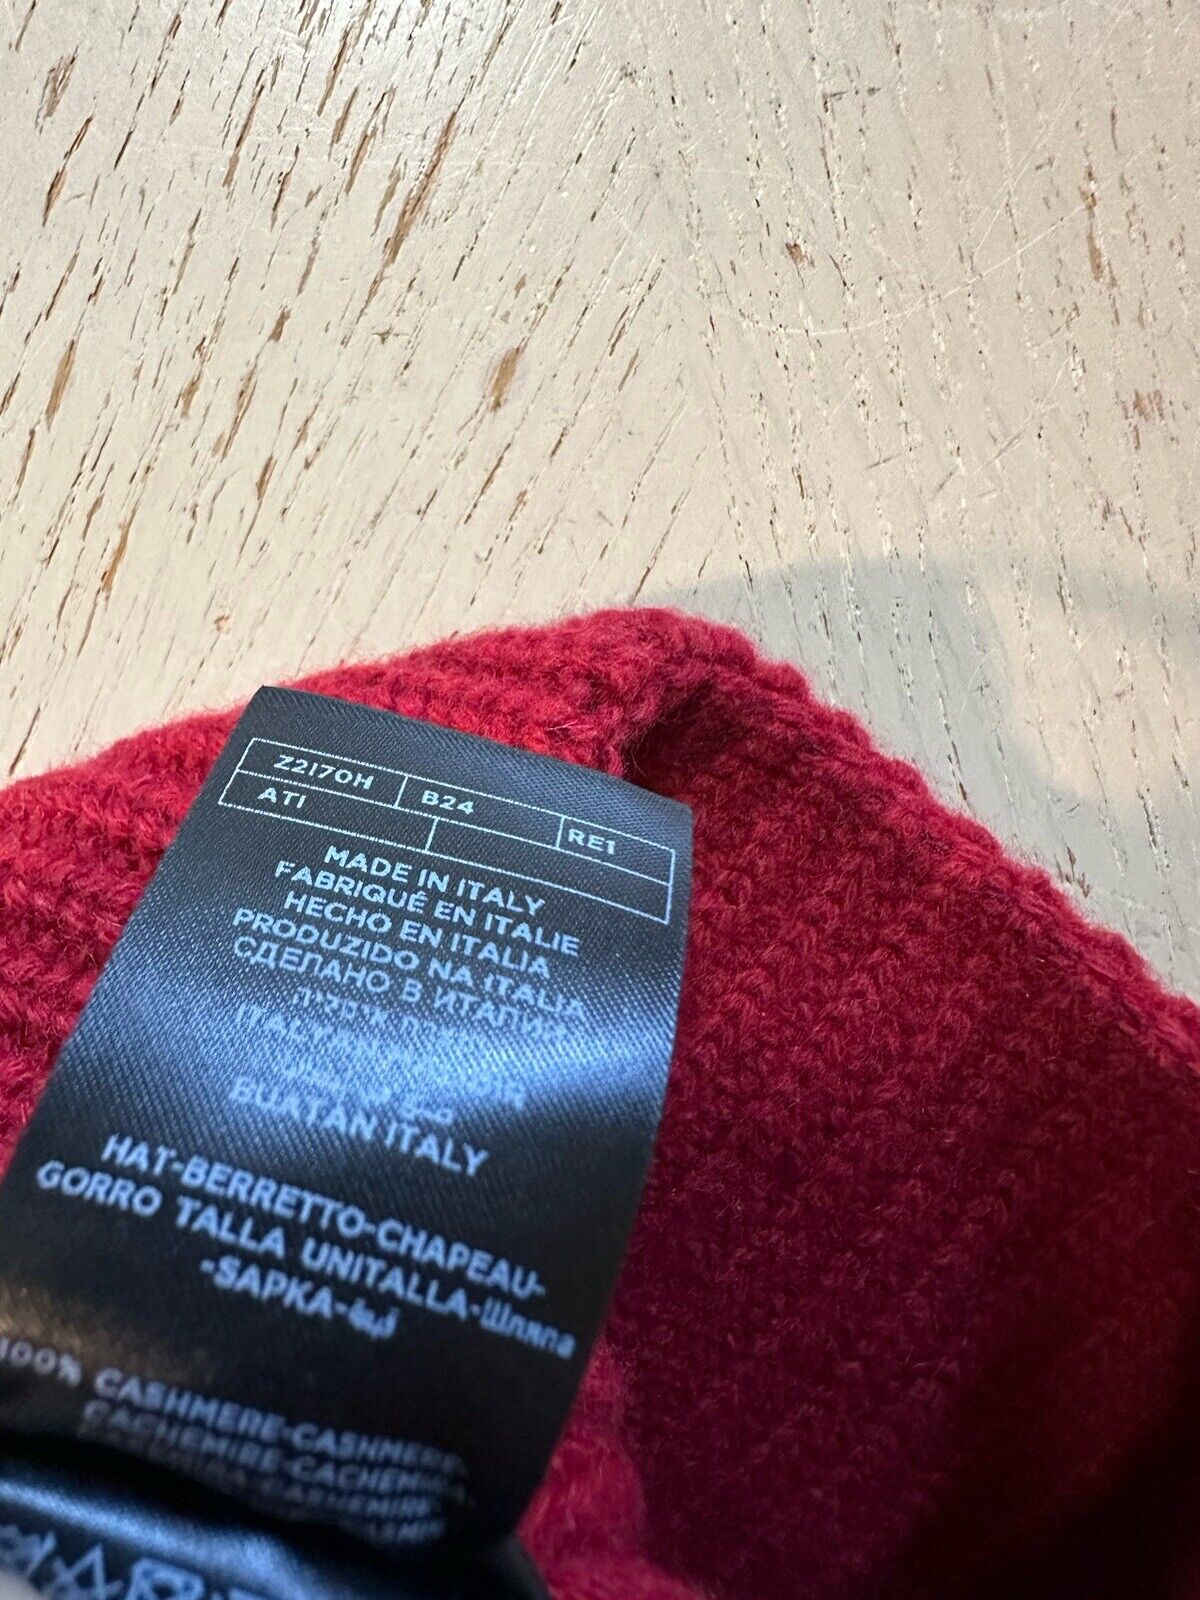 ZZegna Mens Cashmere Beanie Hat Red Size One Size Italy